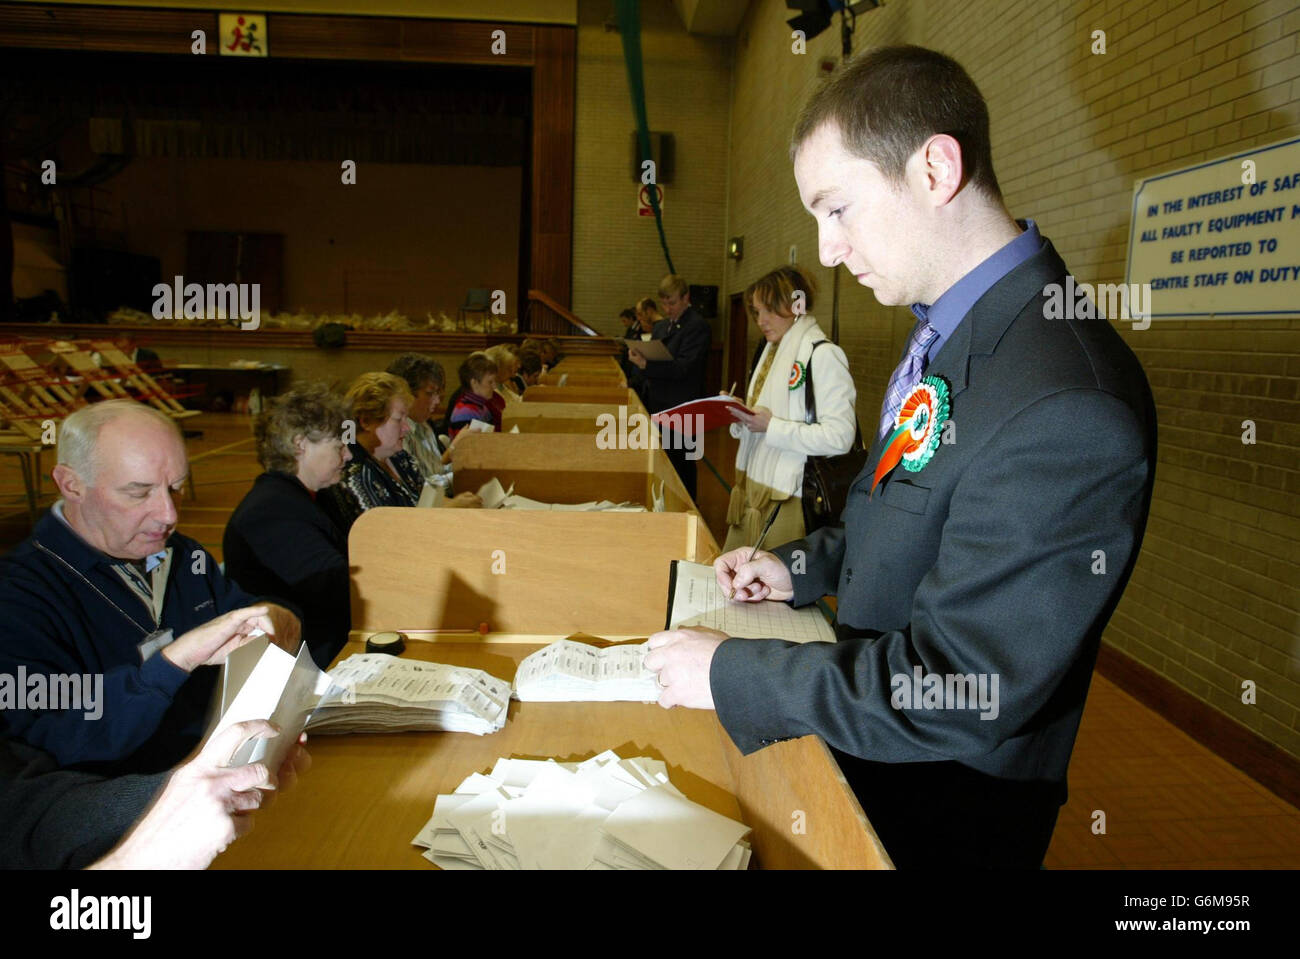 Philip McGuigan of Sinn Fein looks on as election papers are counted at the North Antrim count at Ballymoney, for the Northern Ireland Assembly. David Trimble's Ulster Unionists and the Rev Ian Paisley's Democratic Unionists are running neck-and-neck in a tight Northern Ireland Assembly Election contest, an Exit poll claimed today. The poll, which surfaced two hours before counting for the Assembly's 108 seats got under way across Northern Ireland, also put Sinn Fein four points ahead of its rival nationalist party, the SDLP. Stock Photo